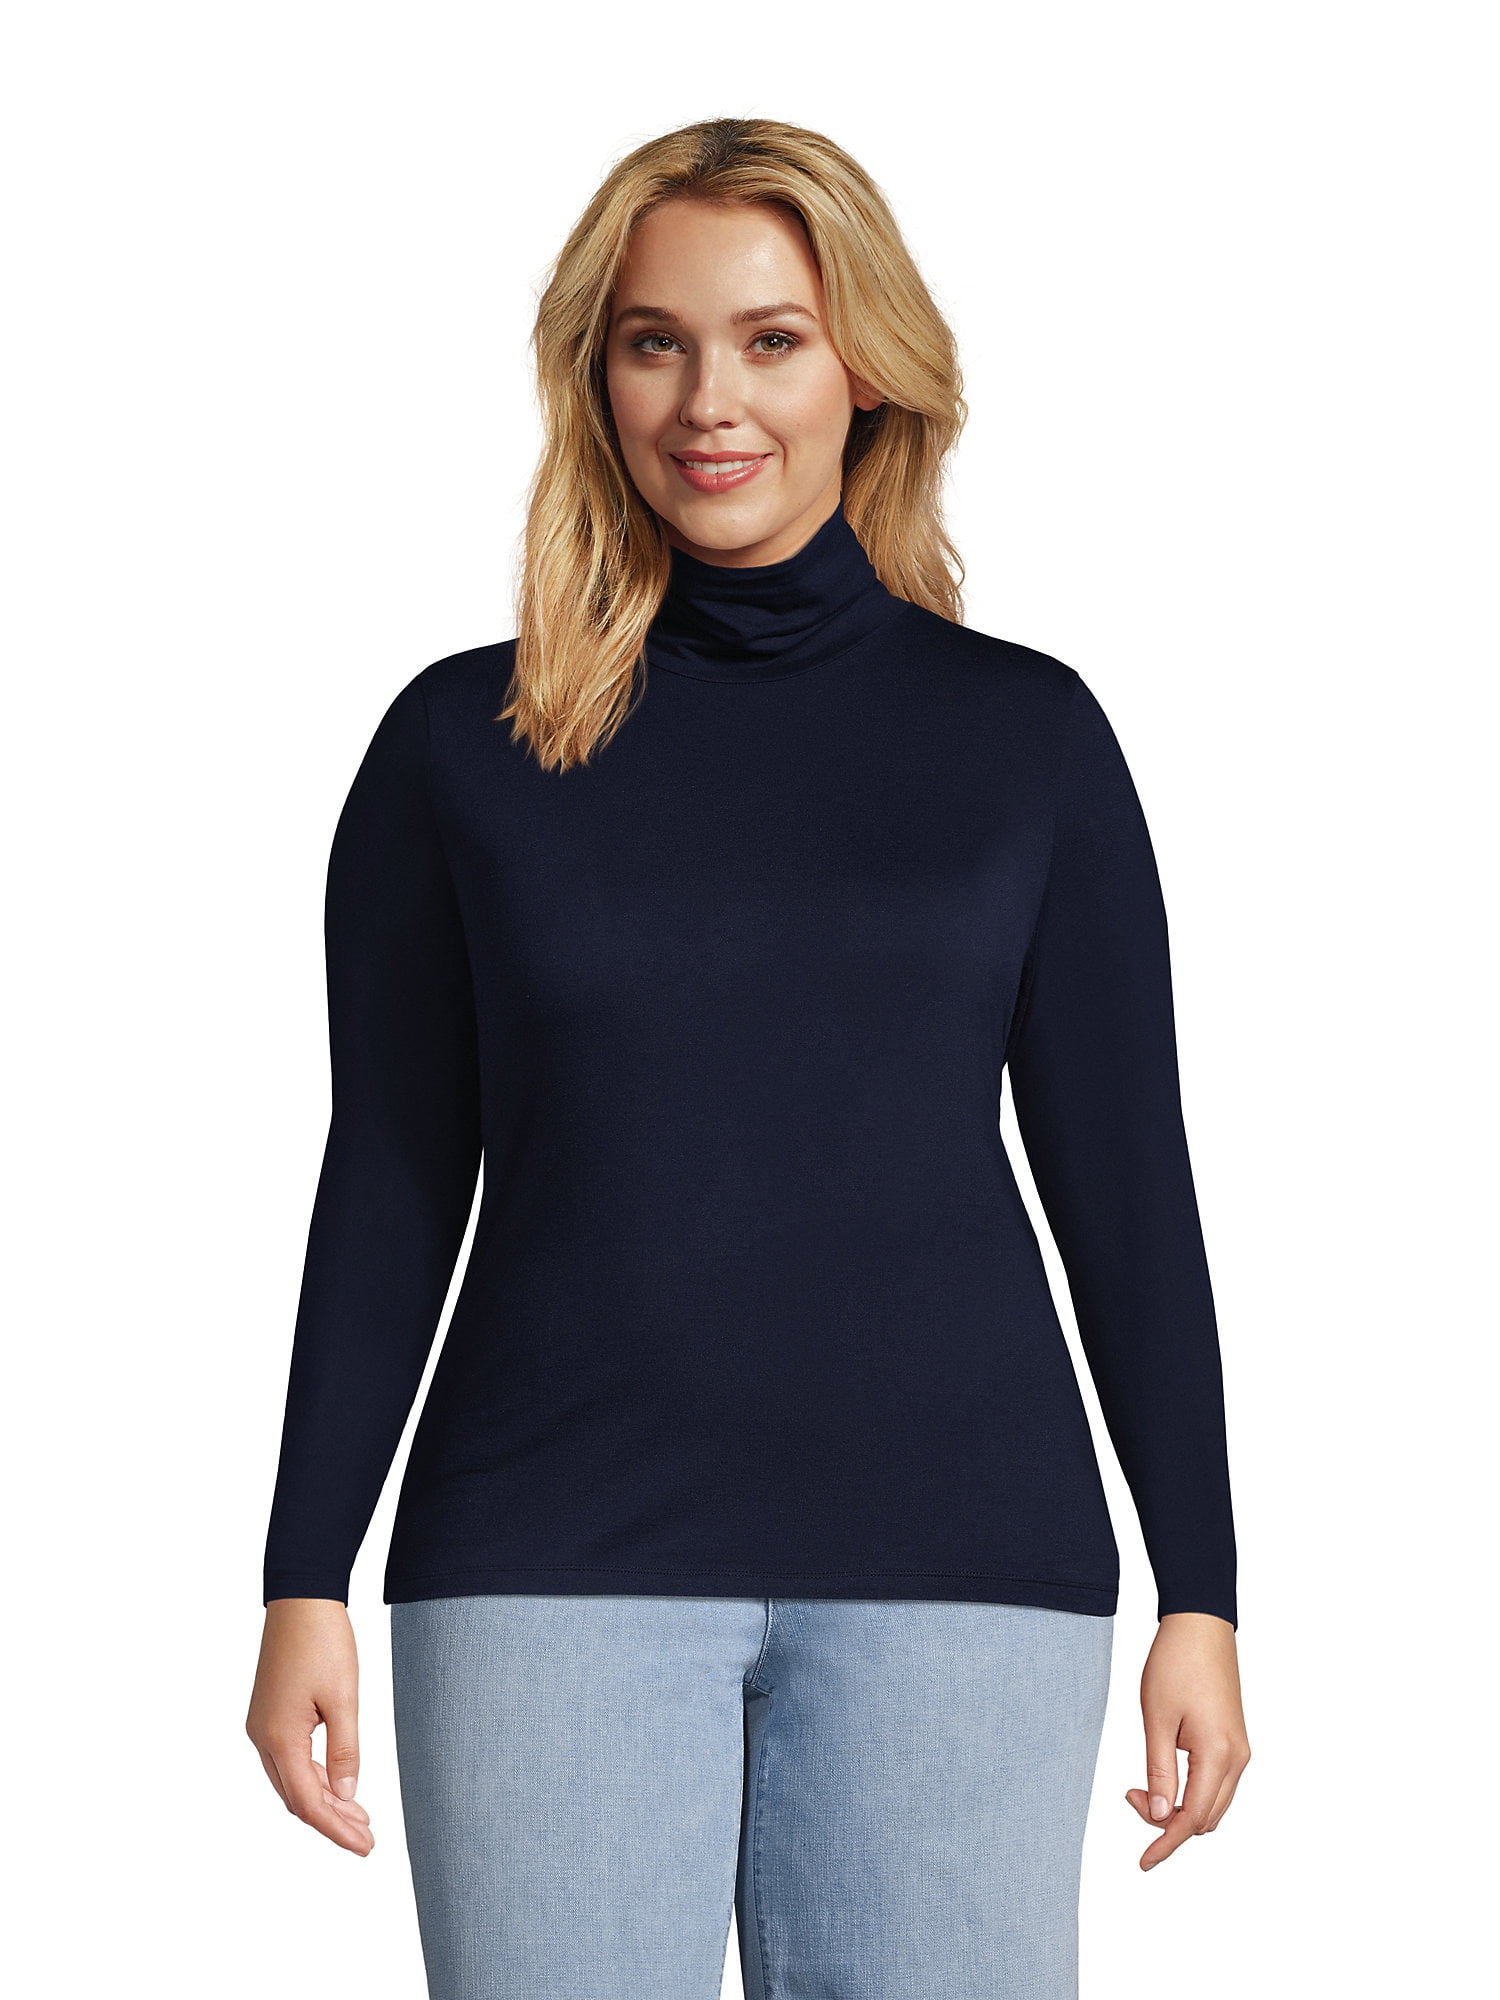 Lands' End Women's Plus Size Lightweight Fitted Long Sleeve Turtleneck ...